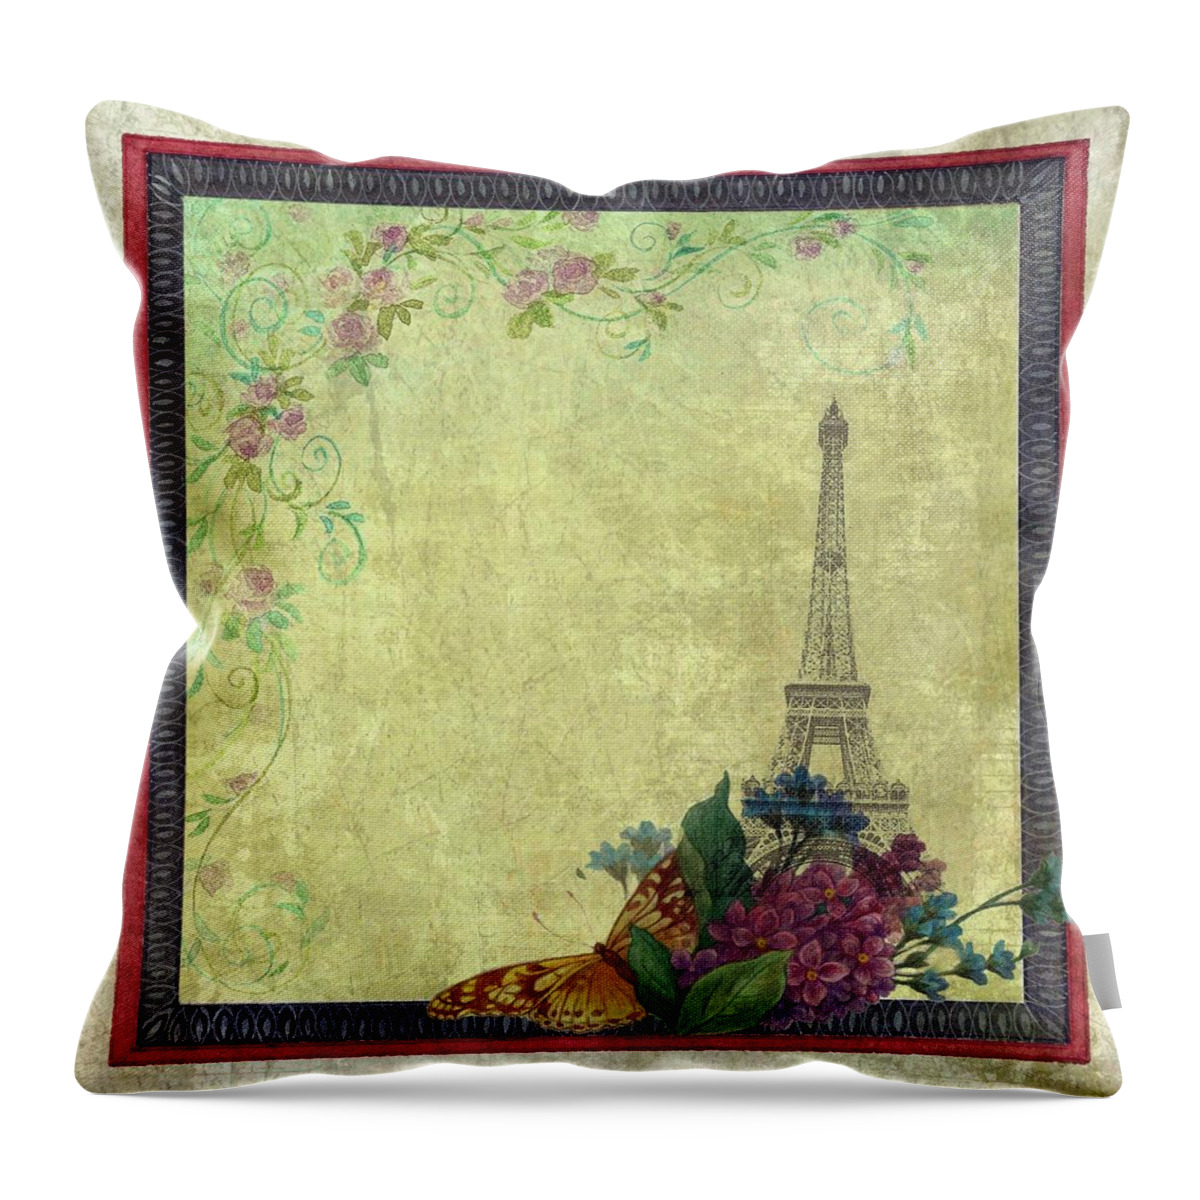 Eiffel Tower Throw Pillow featuring the painting Eiffel Tower Faded Floral with Swirls by Judith Cheng